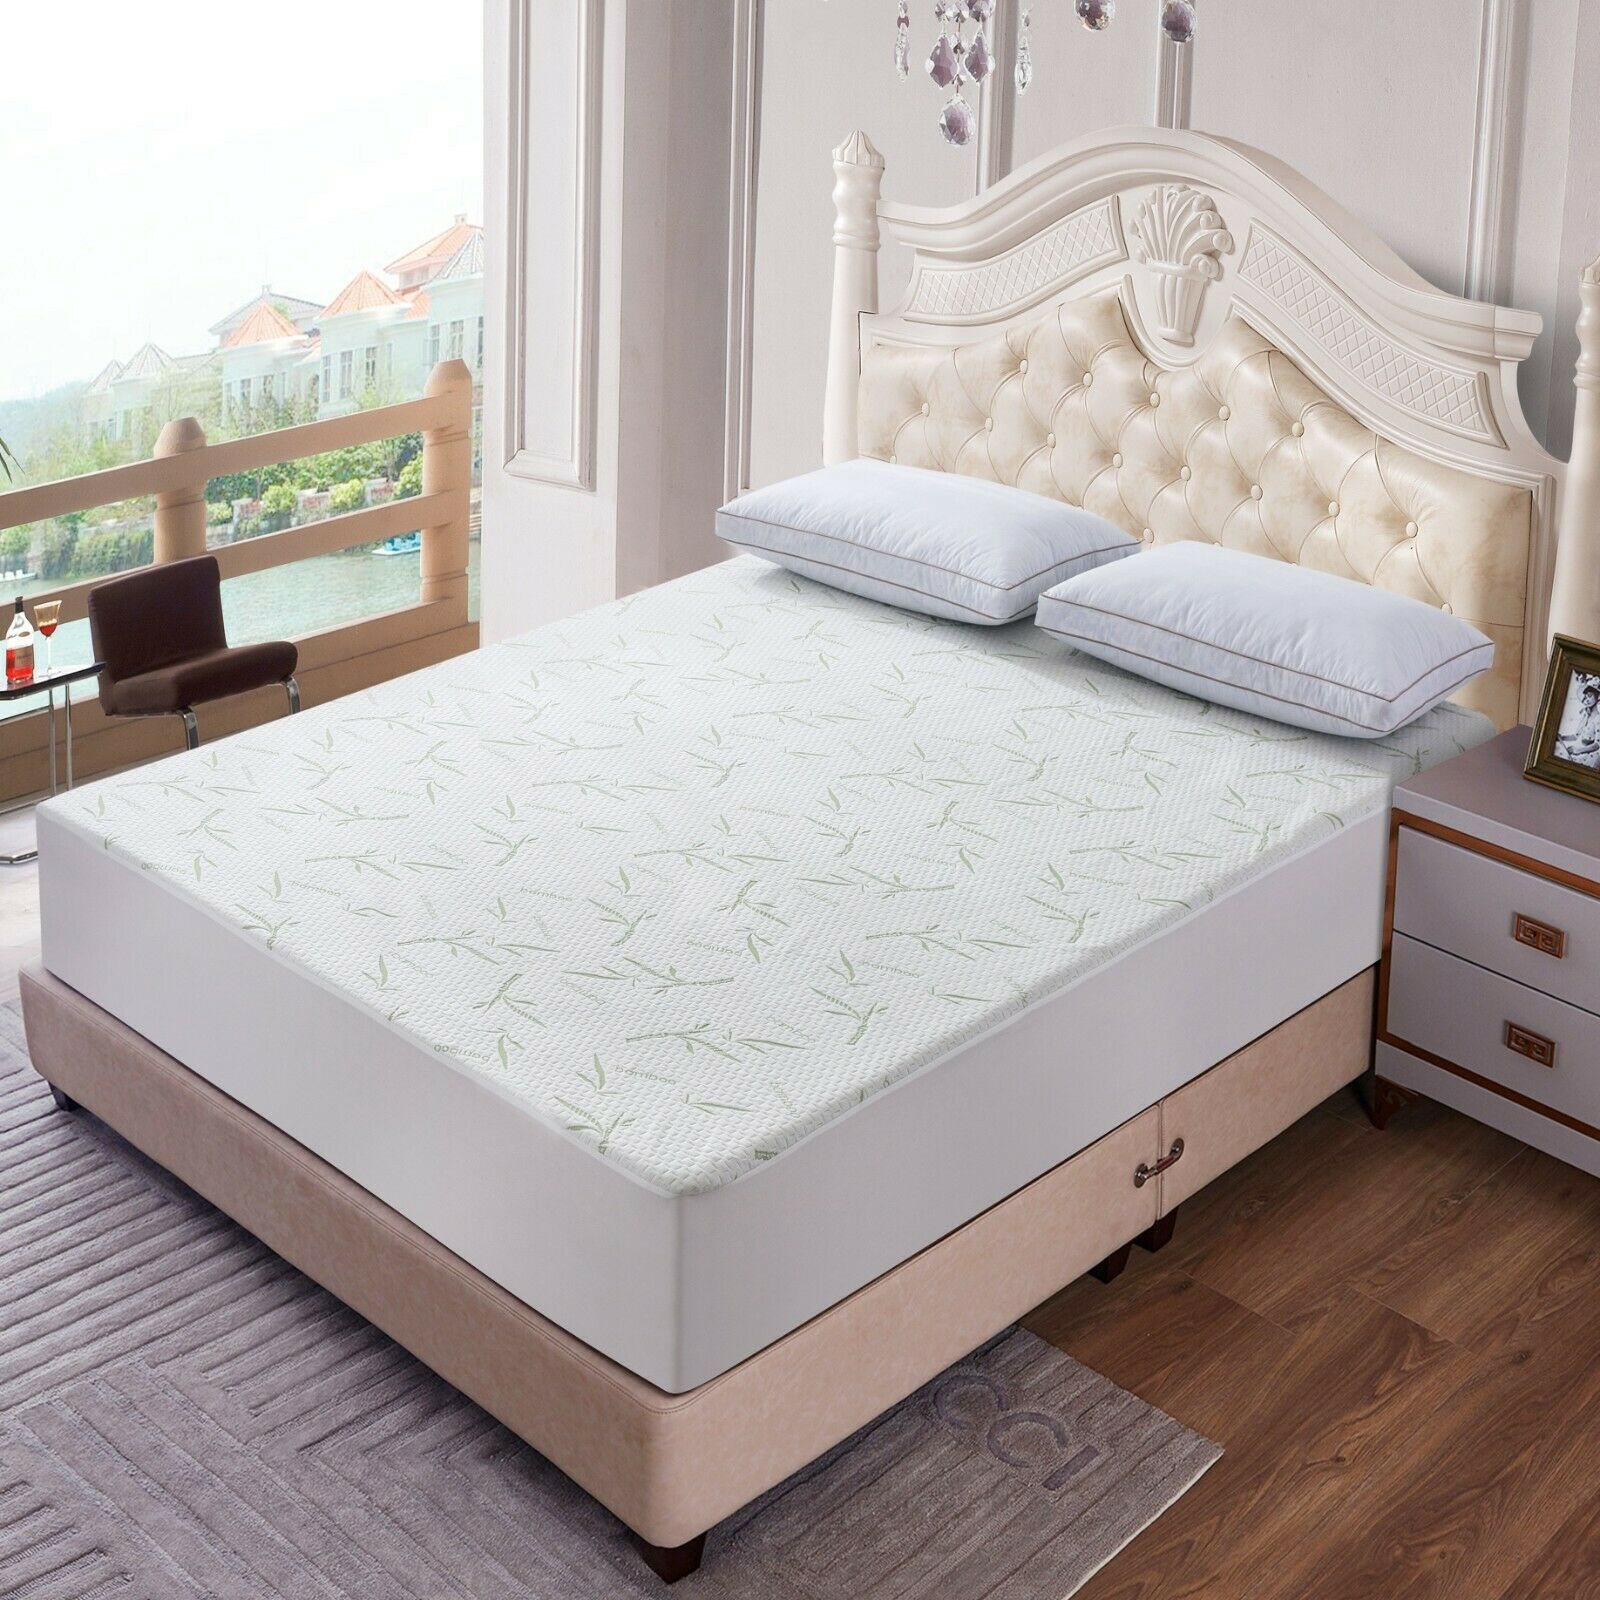 Mattress Protector Waterproof Bamboo Soft Hypoallergenic Fitted Pad Cover